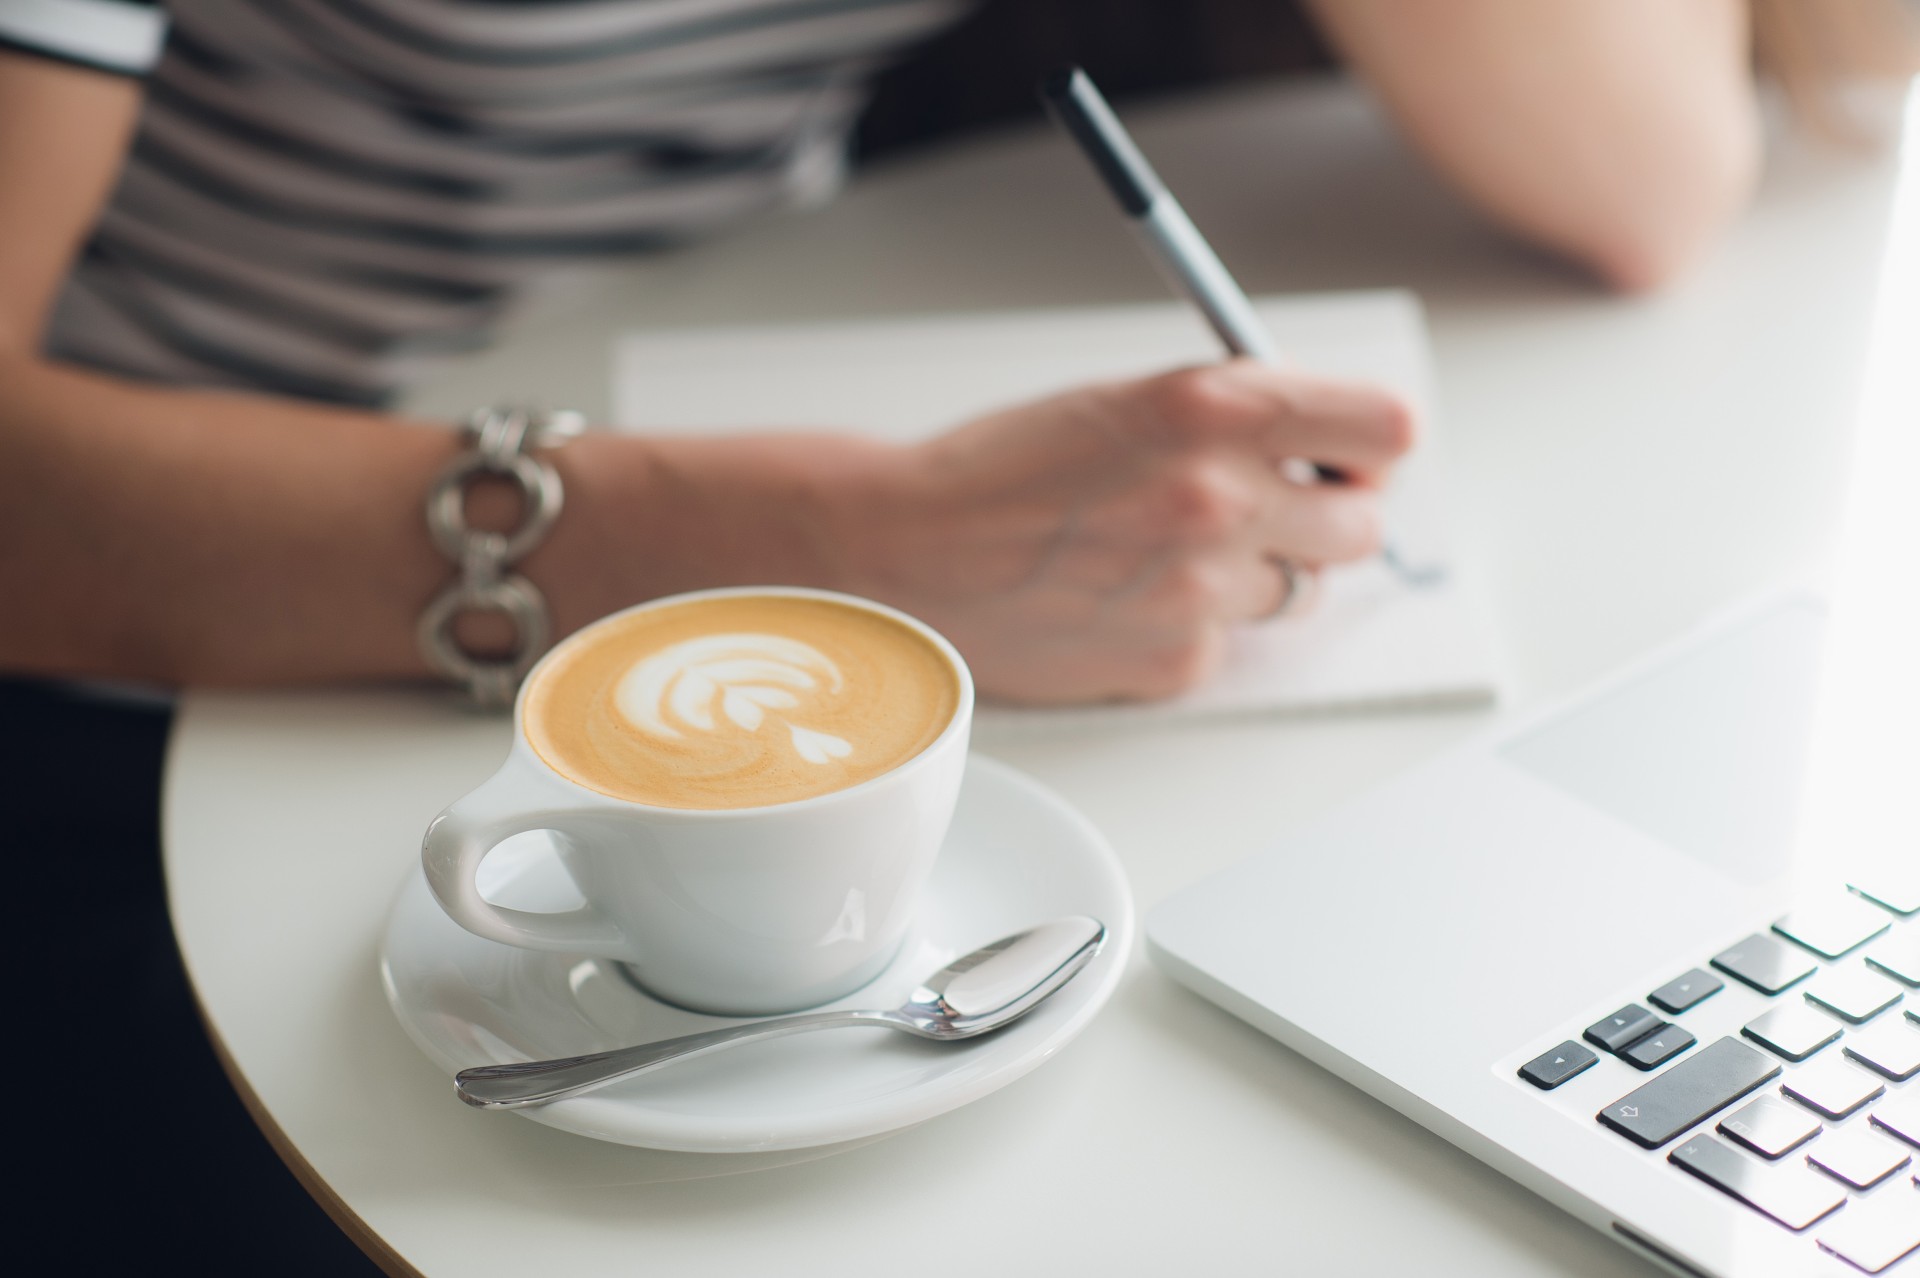 Close up picture of woman’s hands and a cup of cappuccino. Lady is writing in her notebook with a laptop nearby.